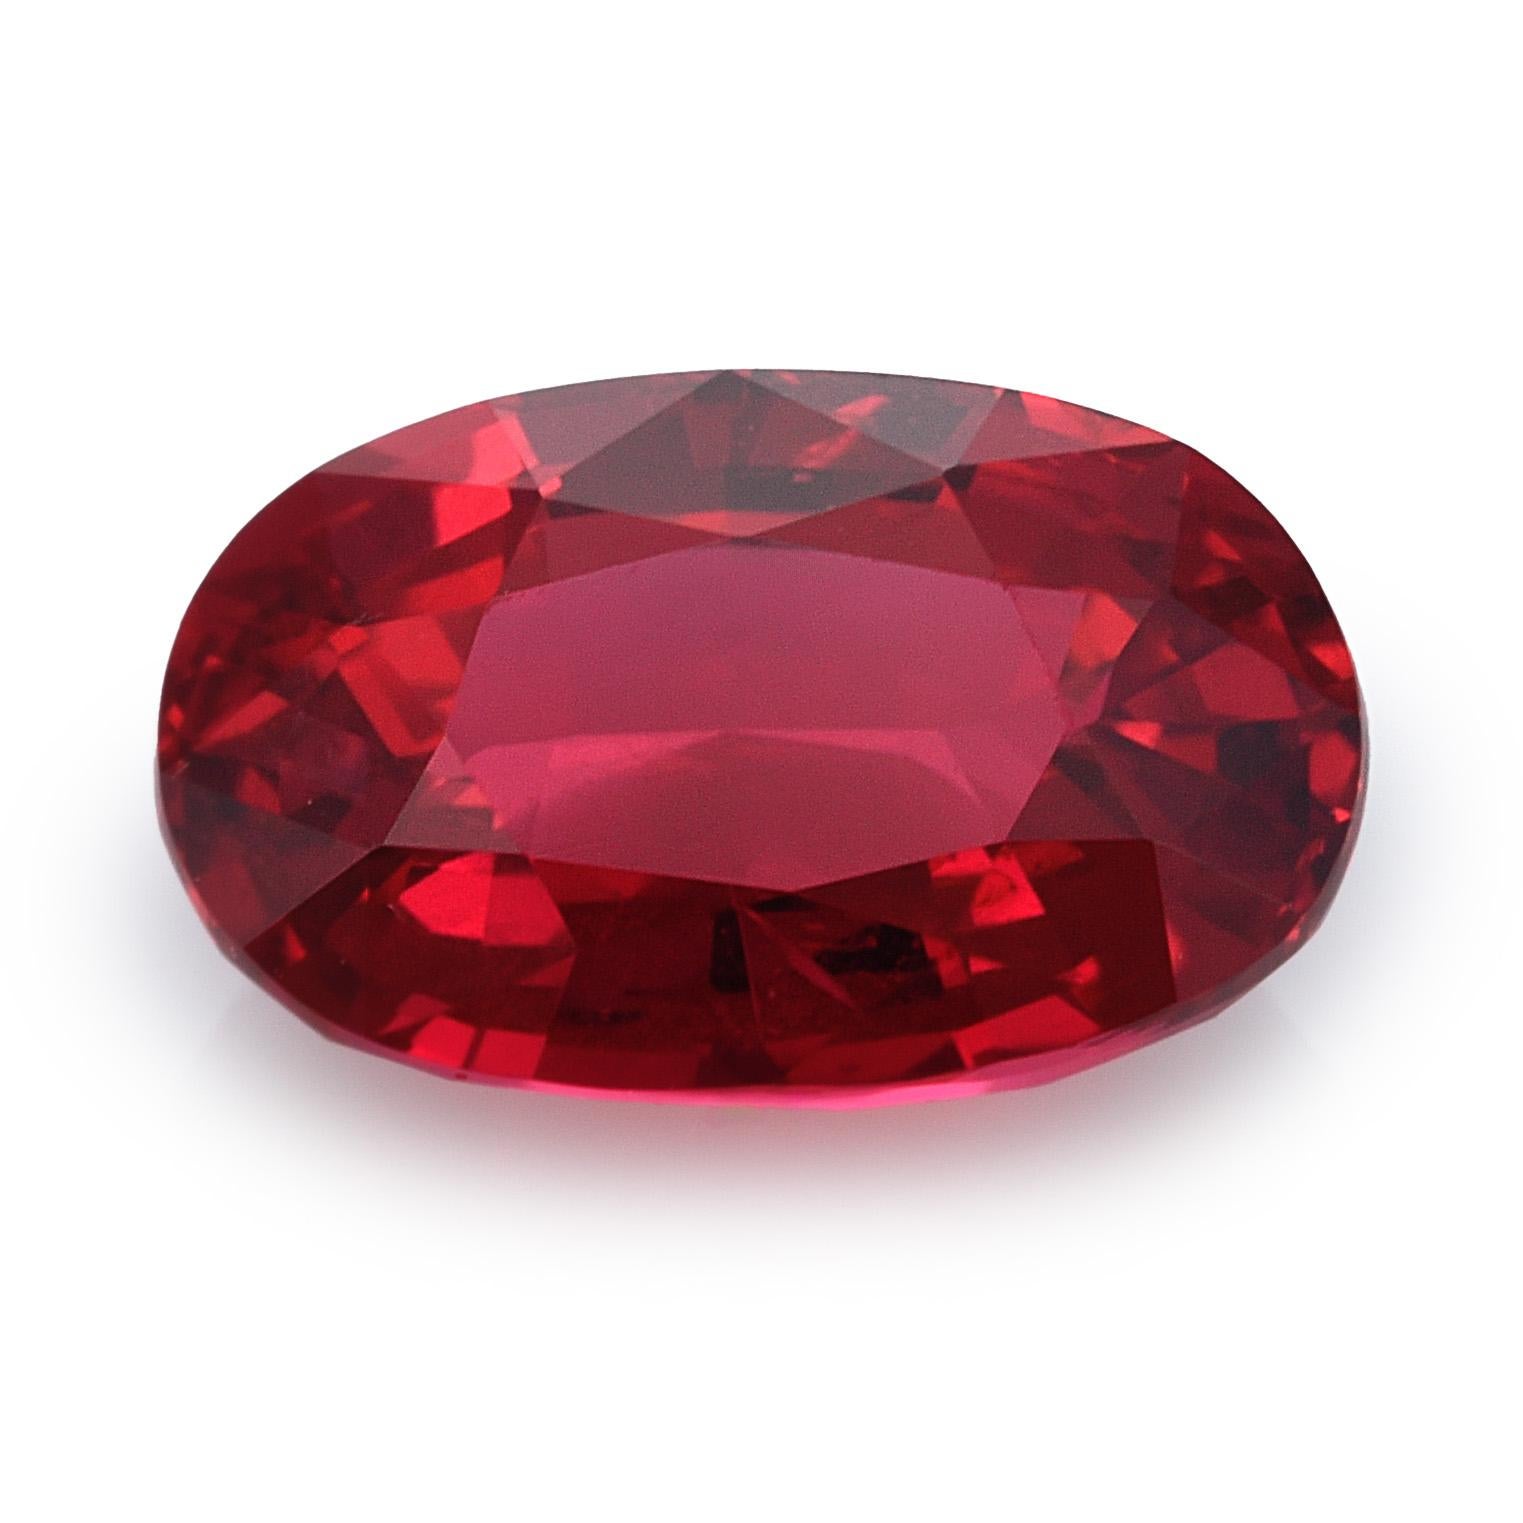 Women's or Men's GIA Certified 1.09 Carats Unheated Mozambique Ruby For Sale